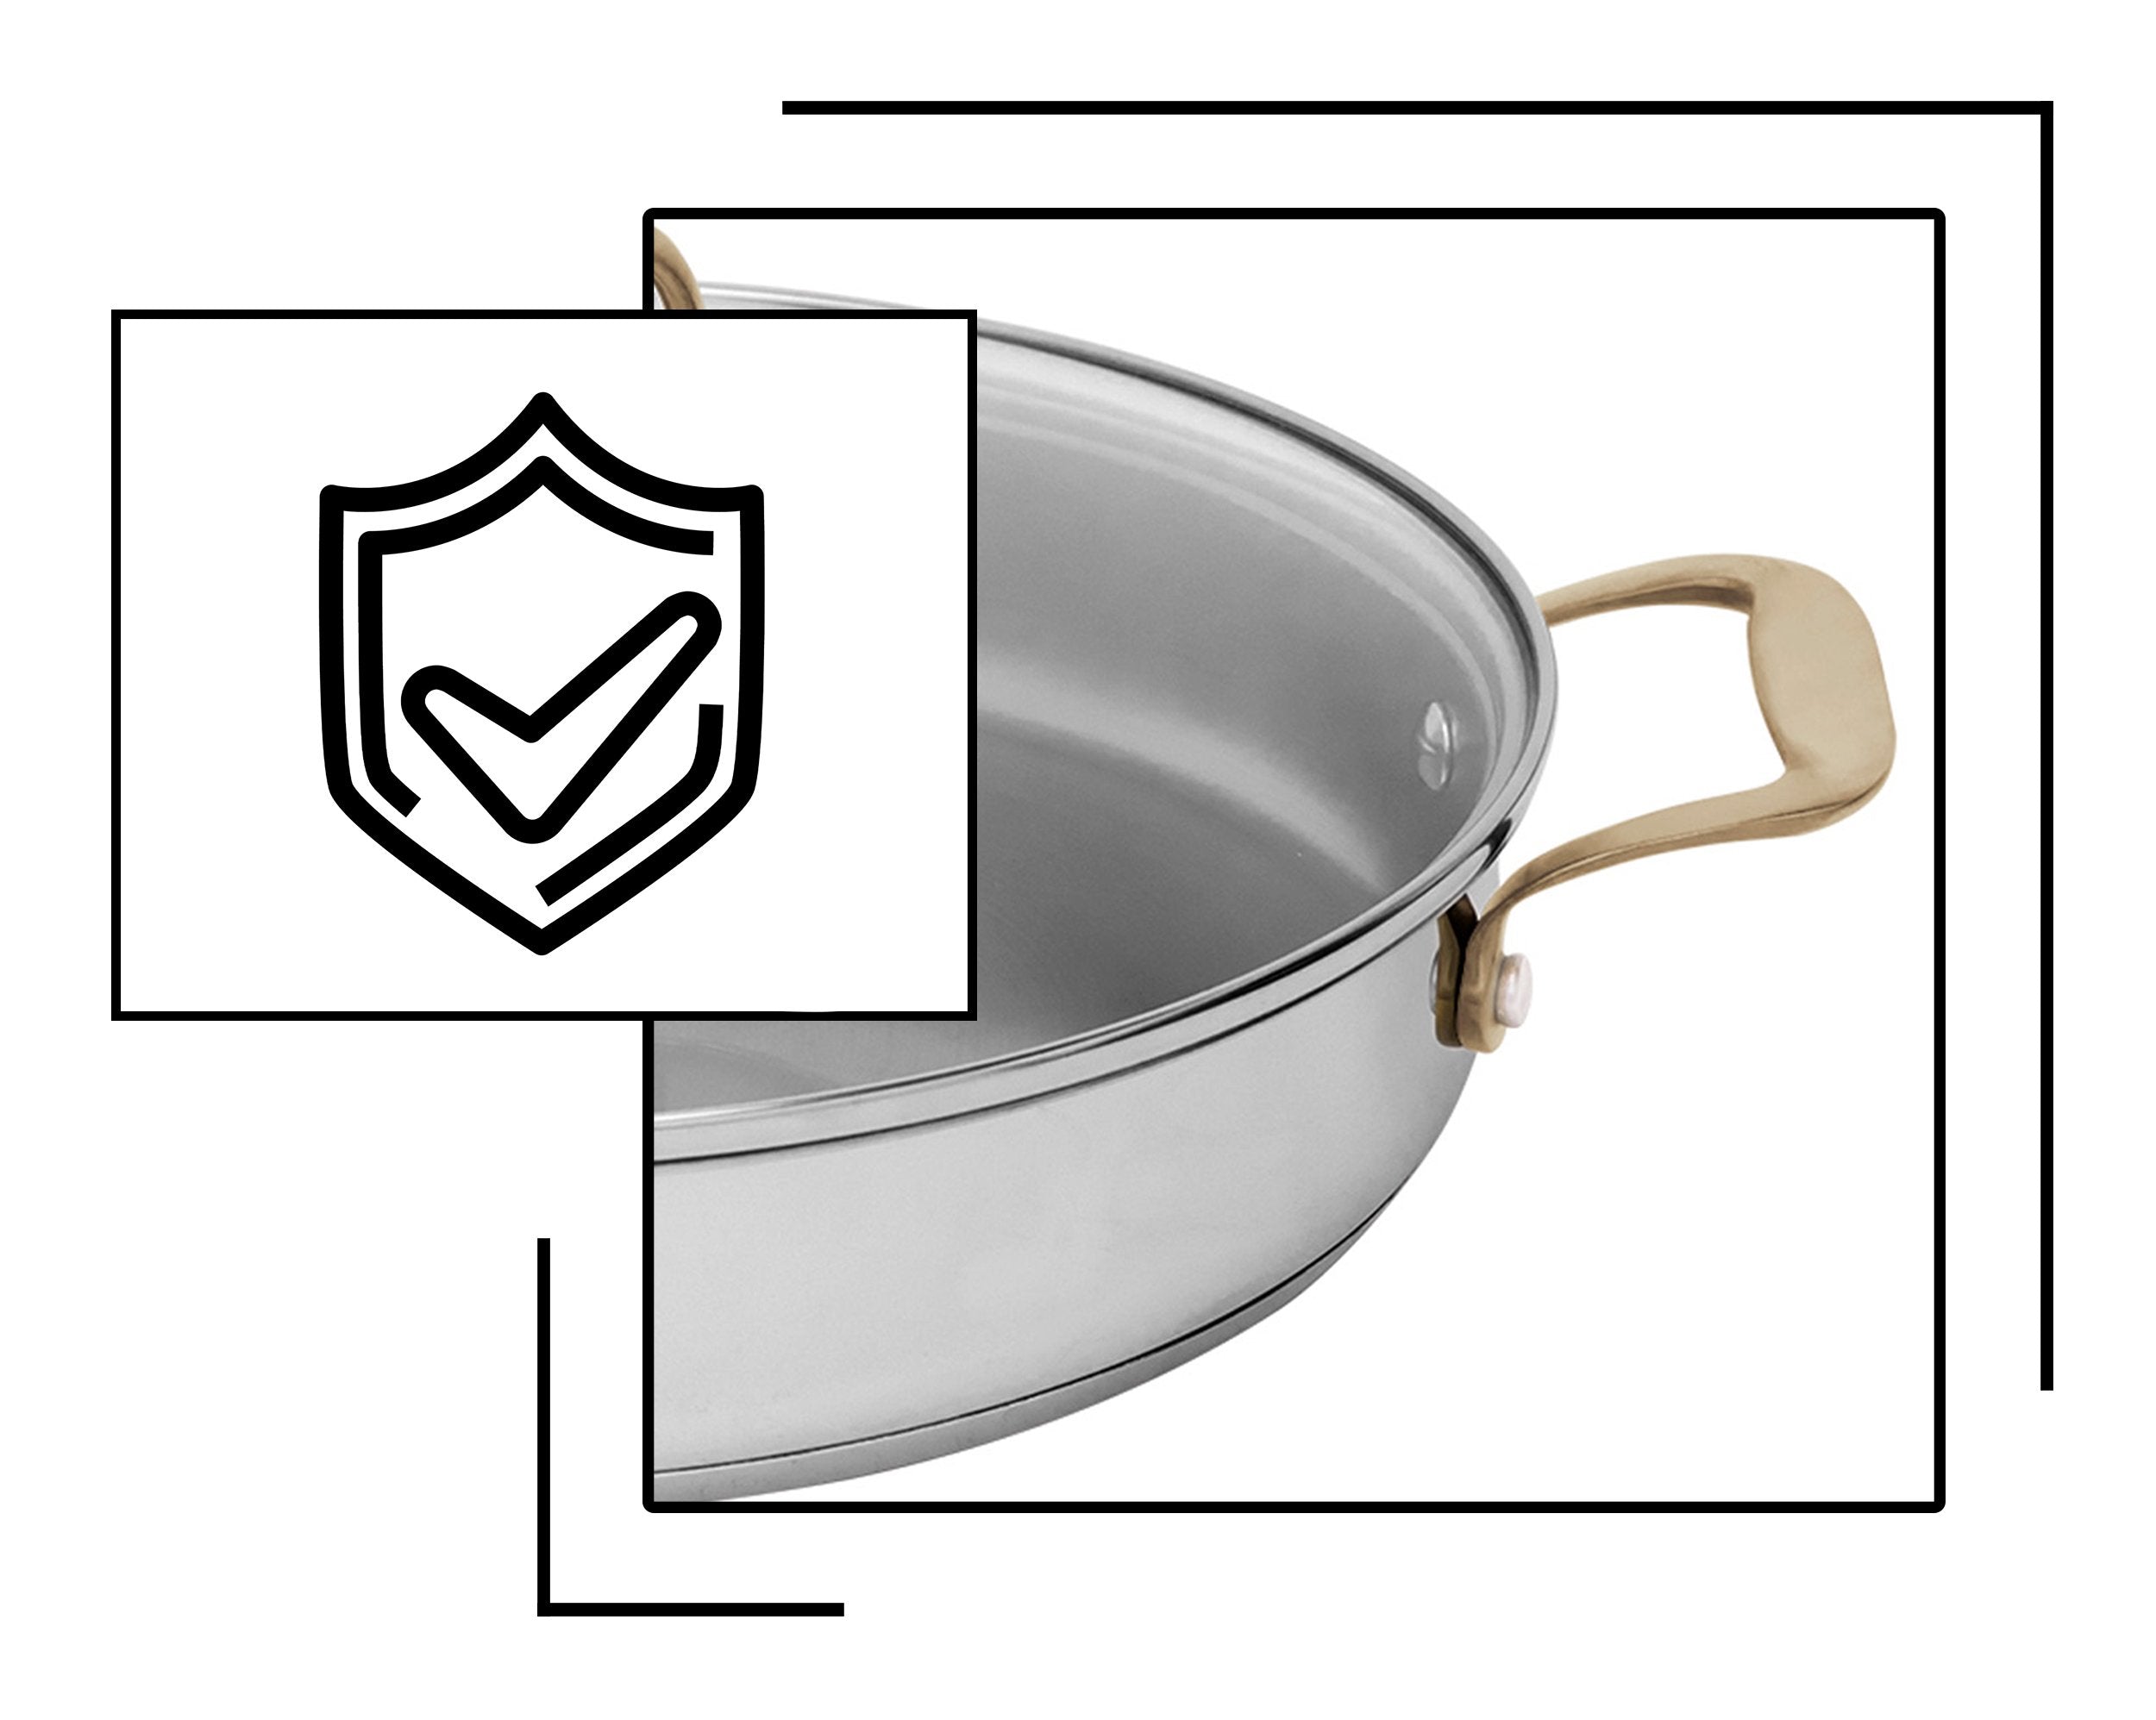 Icon and image representing limited lifetime warranty on cookware